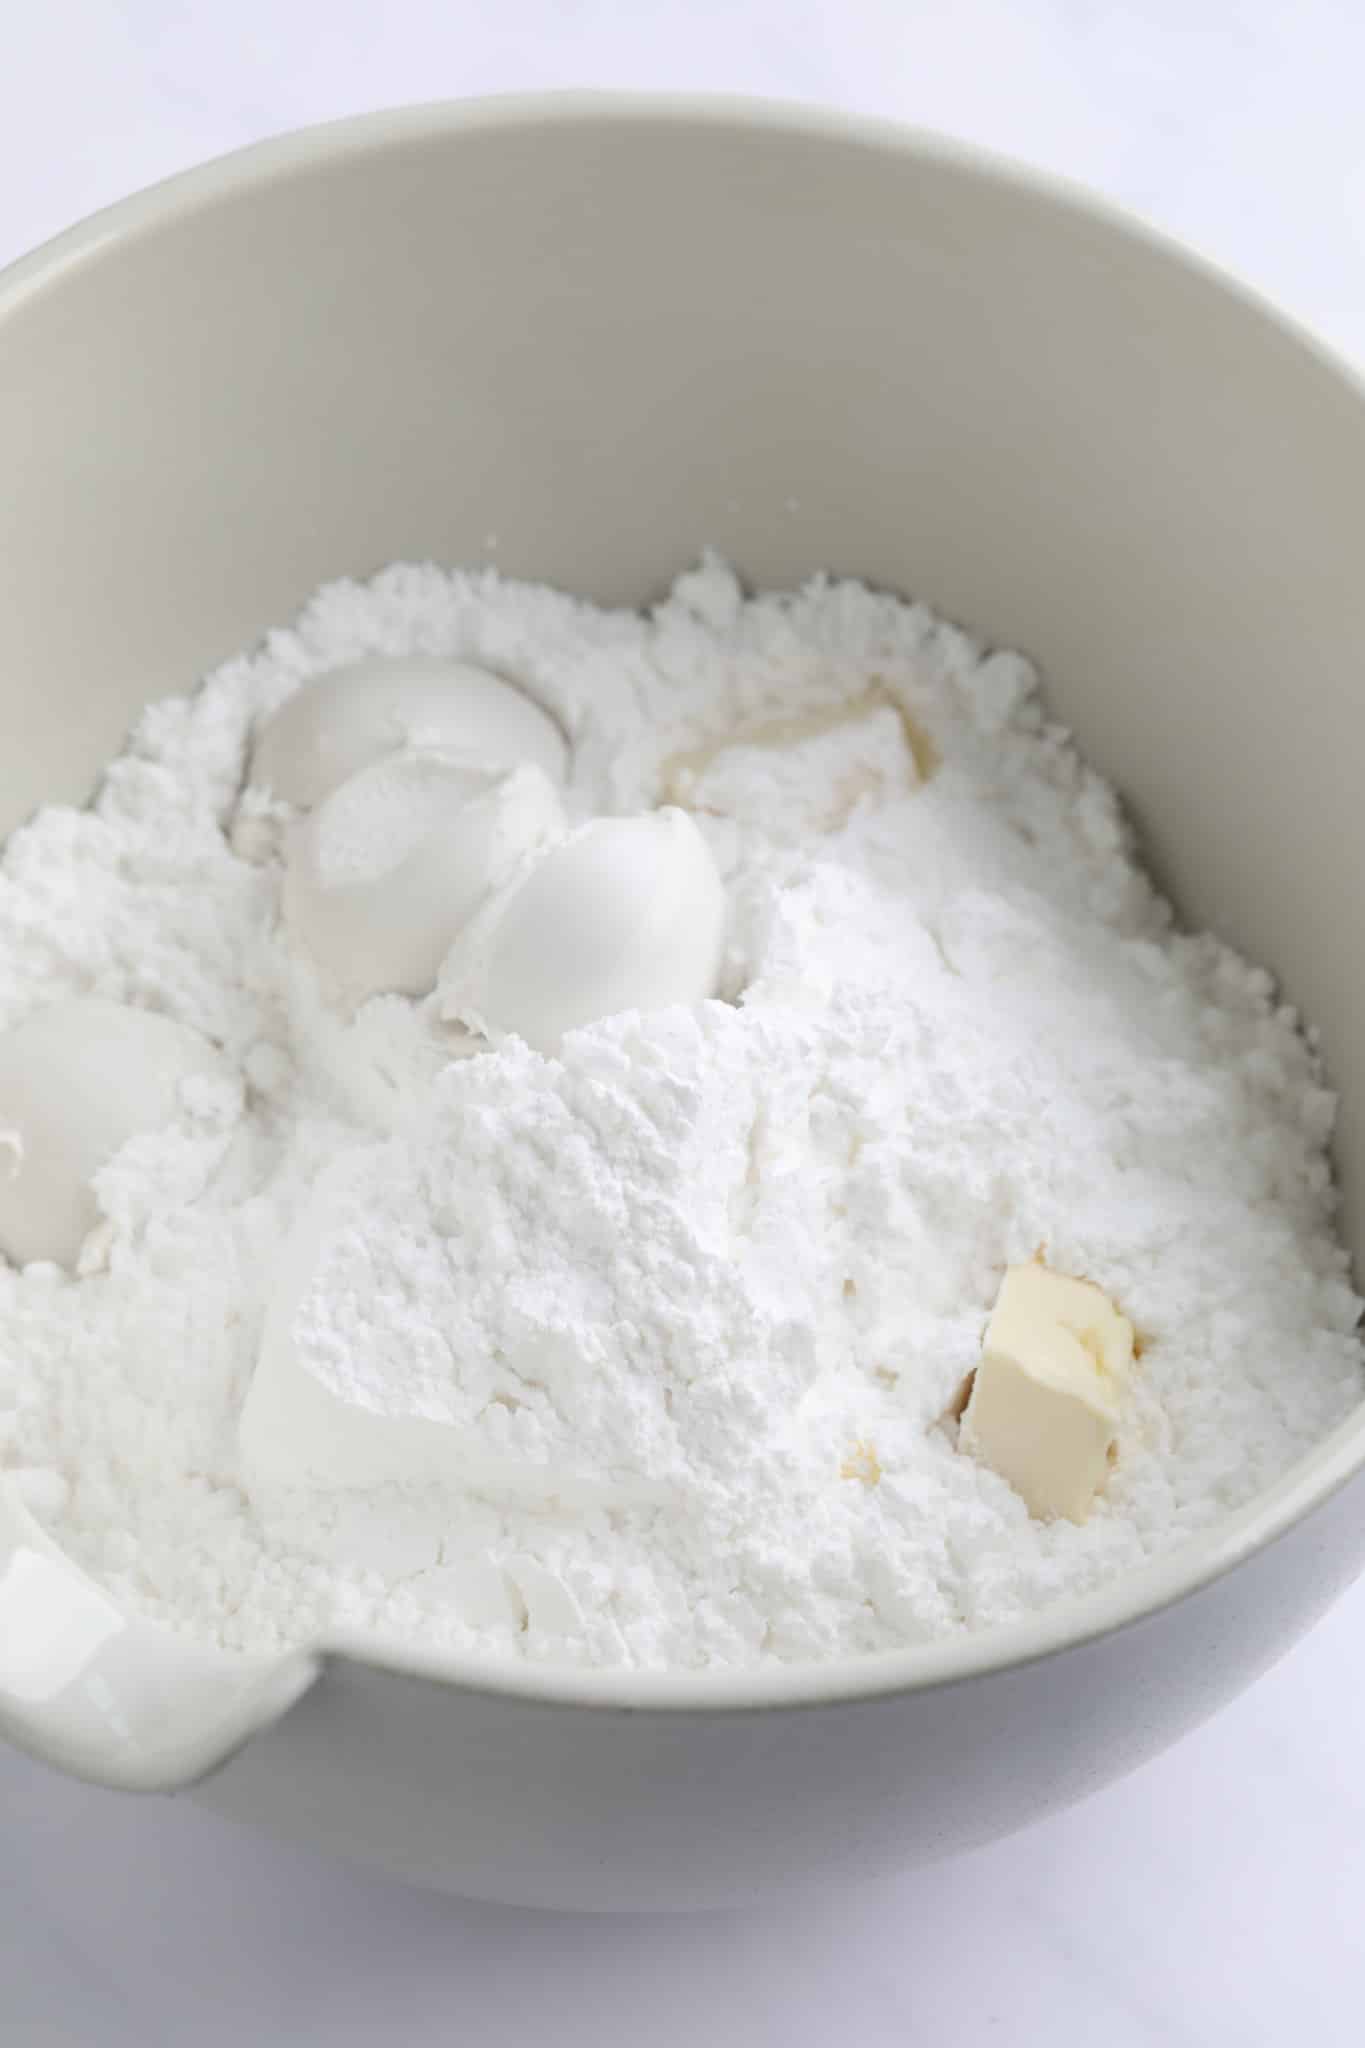 In a large white bowl, whisk together the powdered sugar, coconut milk, and butter.